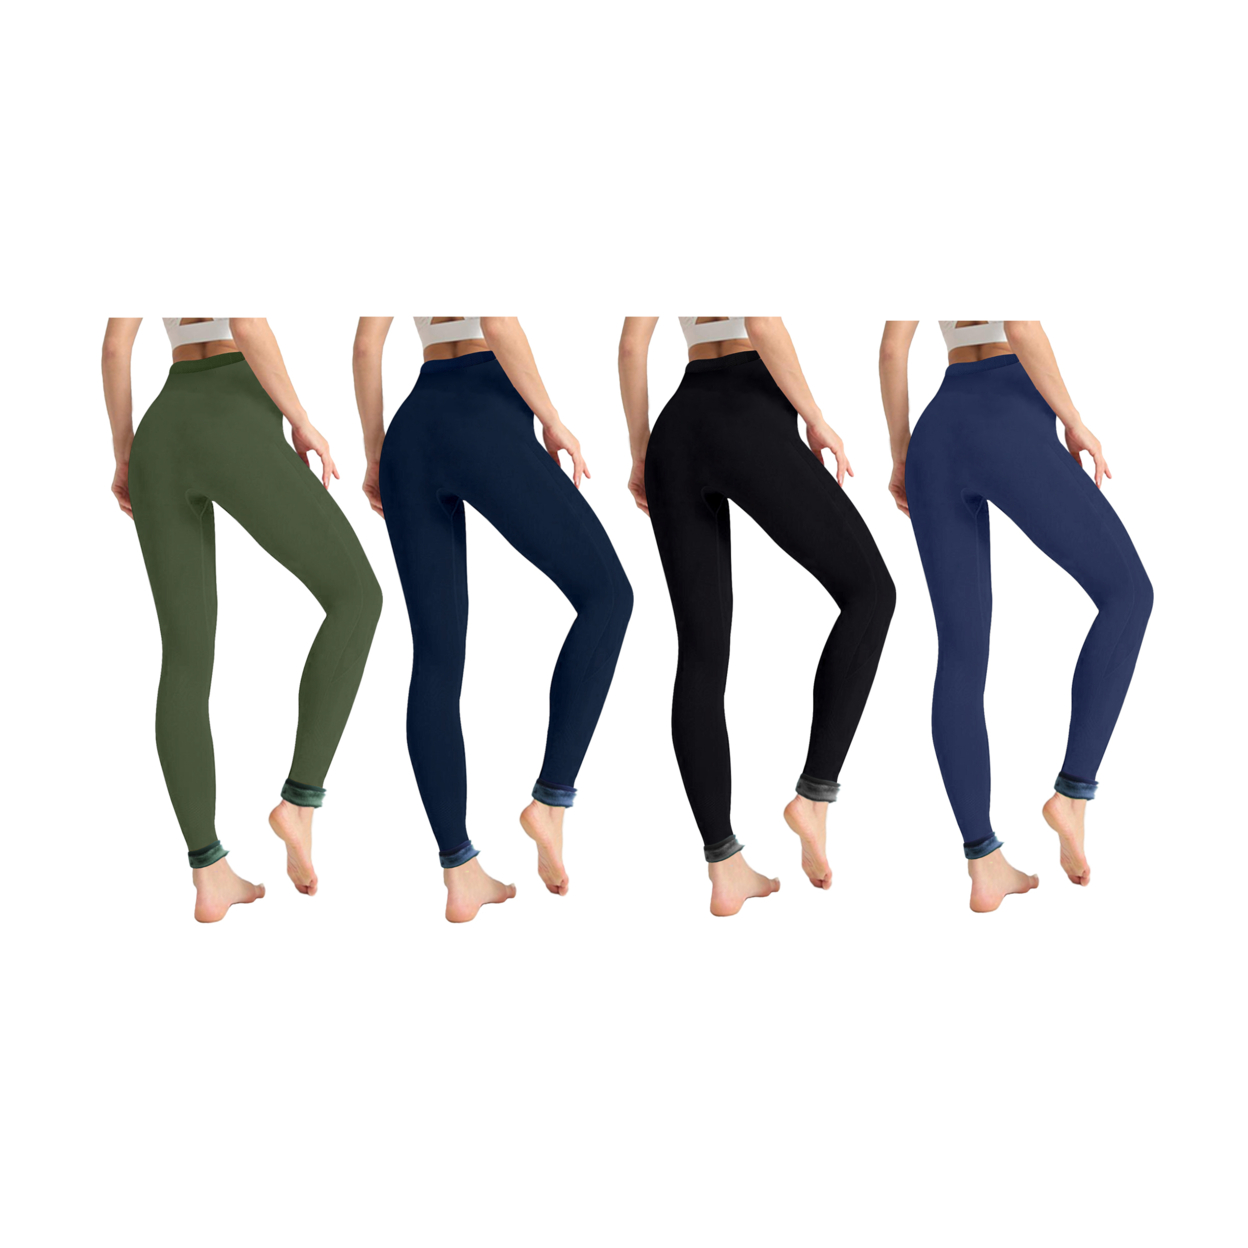 4-Pack: Women's Winter Warm Thick Fur Lined Thermal Leggings (S-2XL) - Assorted, 1X/2X